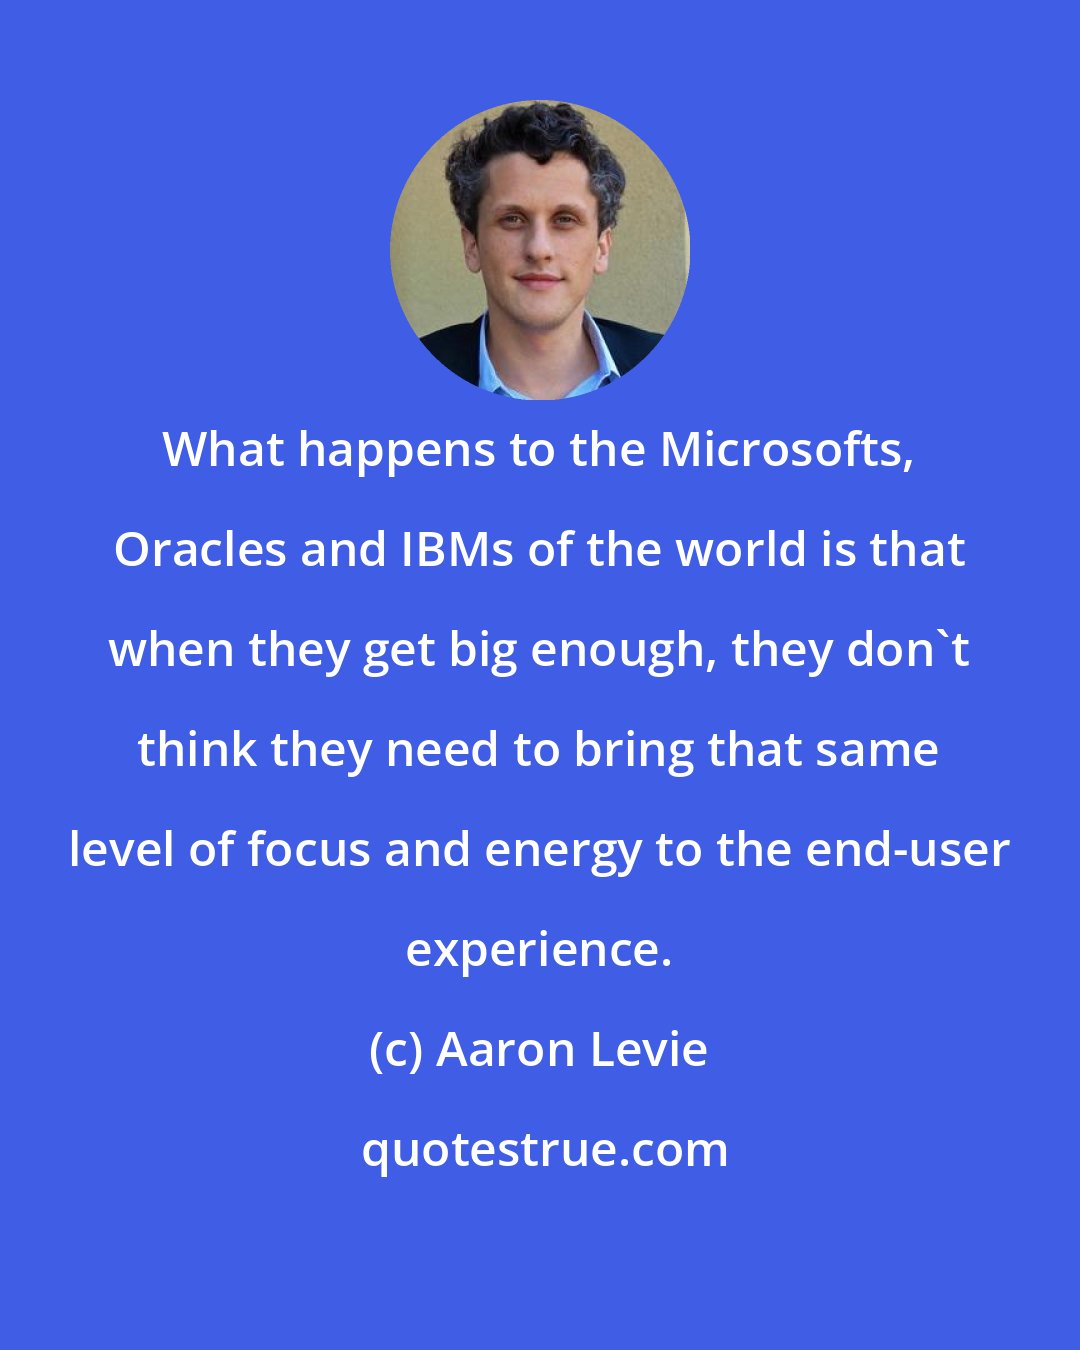 Aaron Levie: What happens to the Microsofts, Oracles and IBMs of the world is that when they get big enough, they don't think they need to bring that same level of focus and energy to the end-user experience.